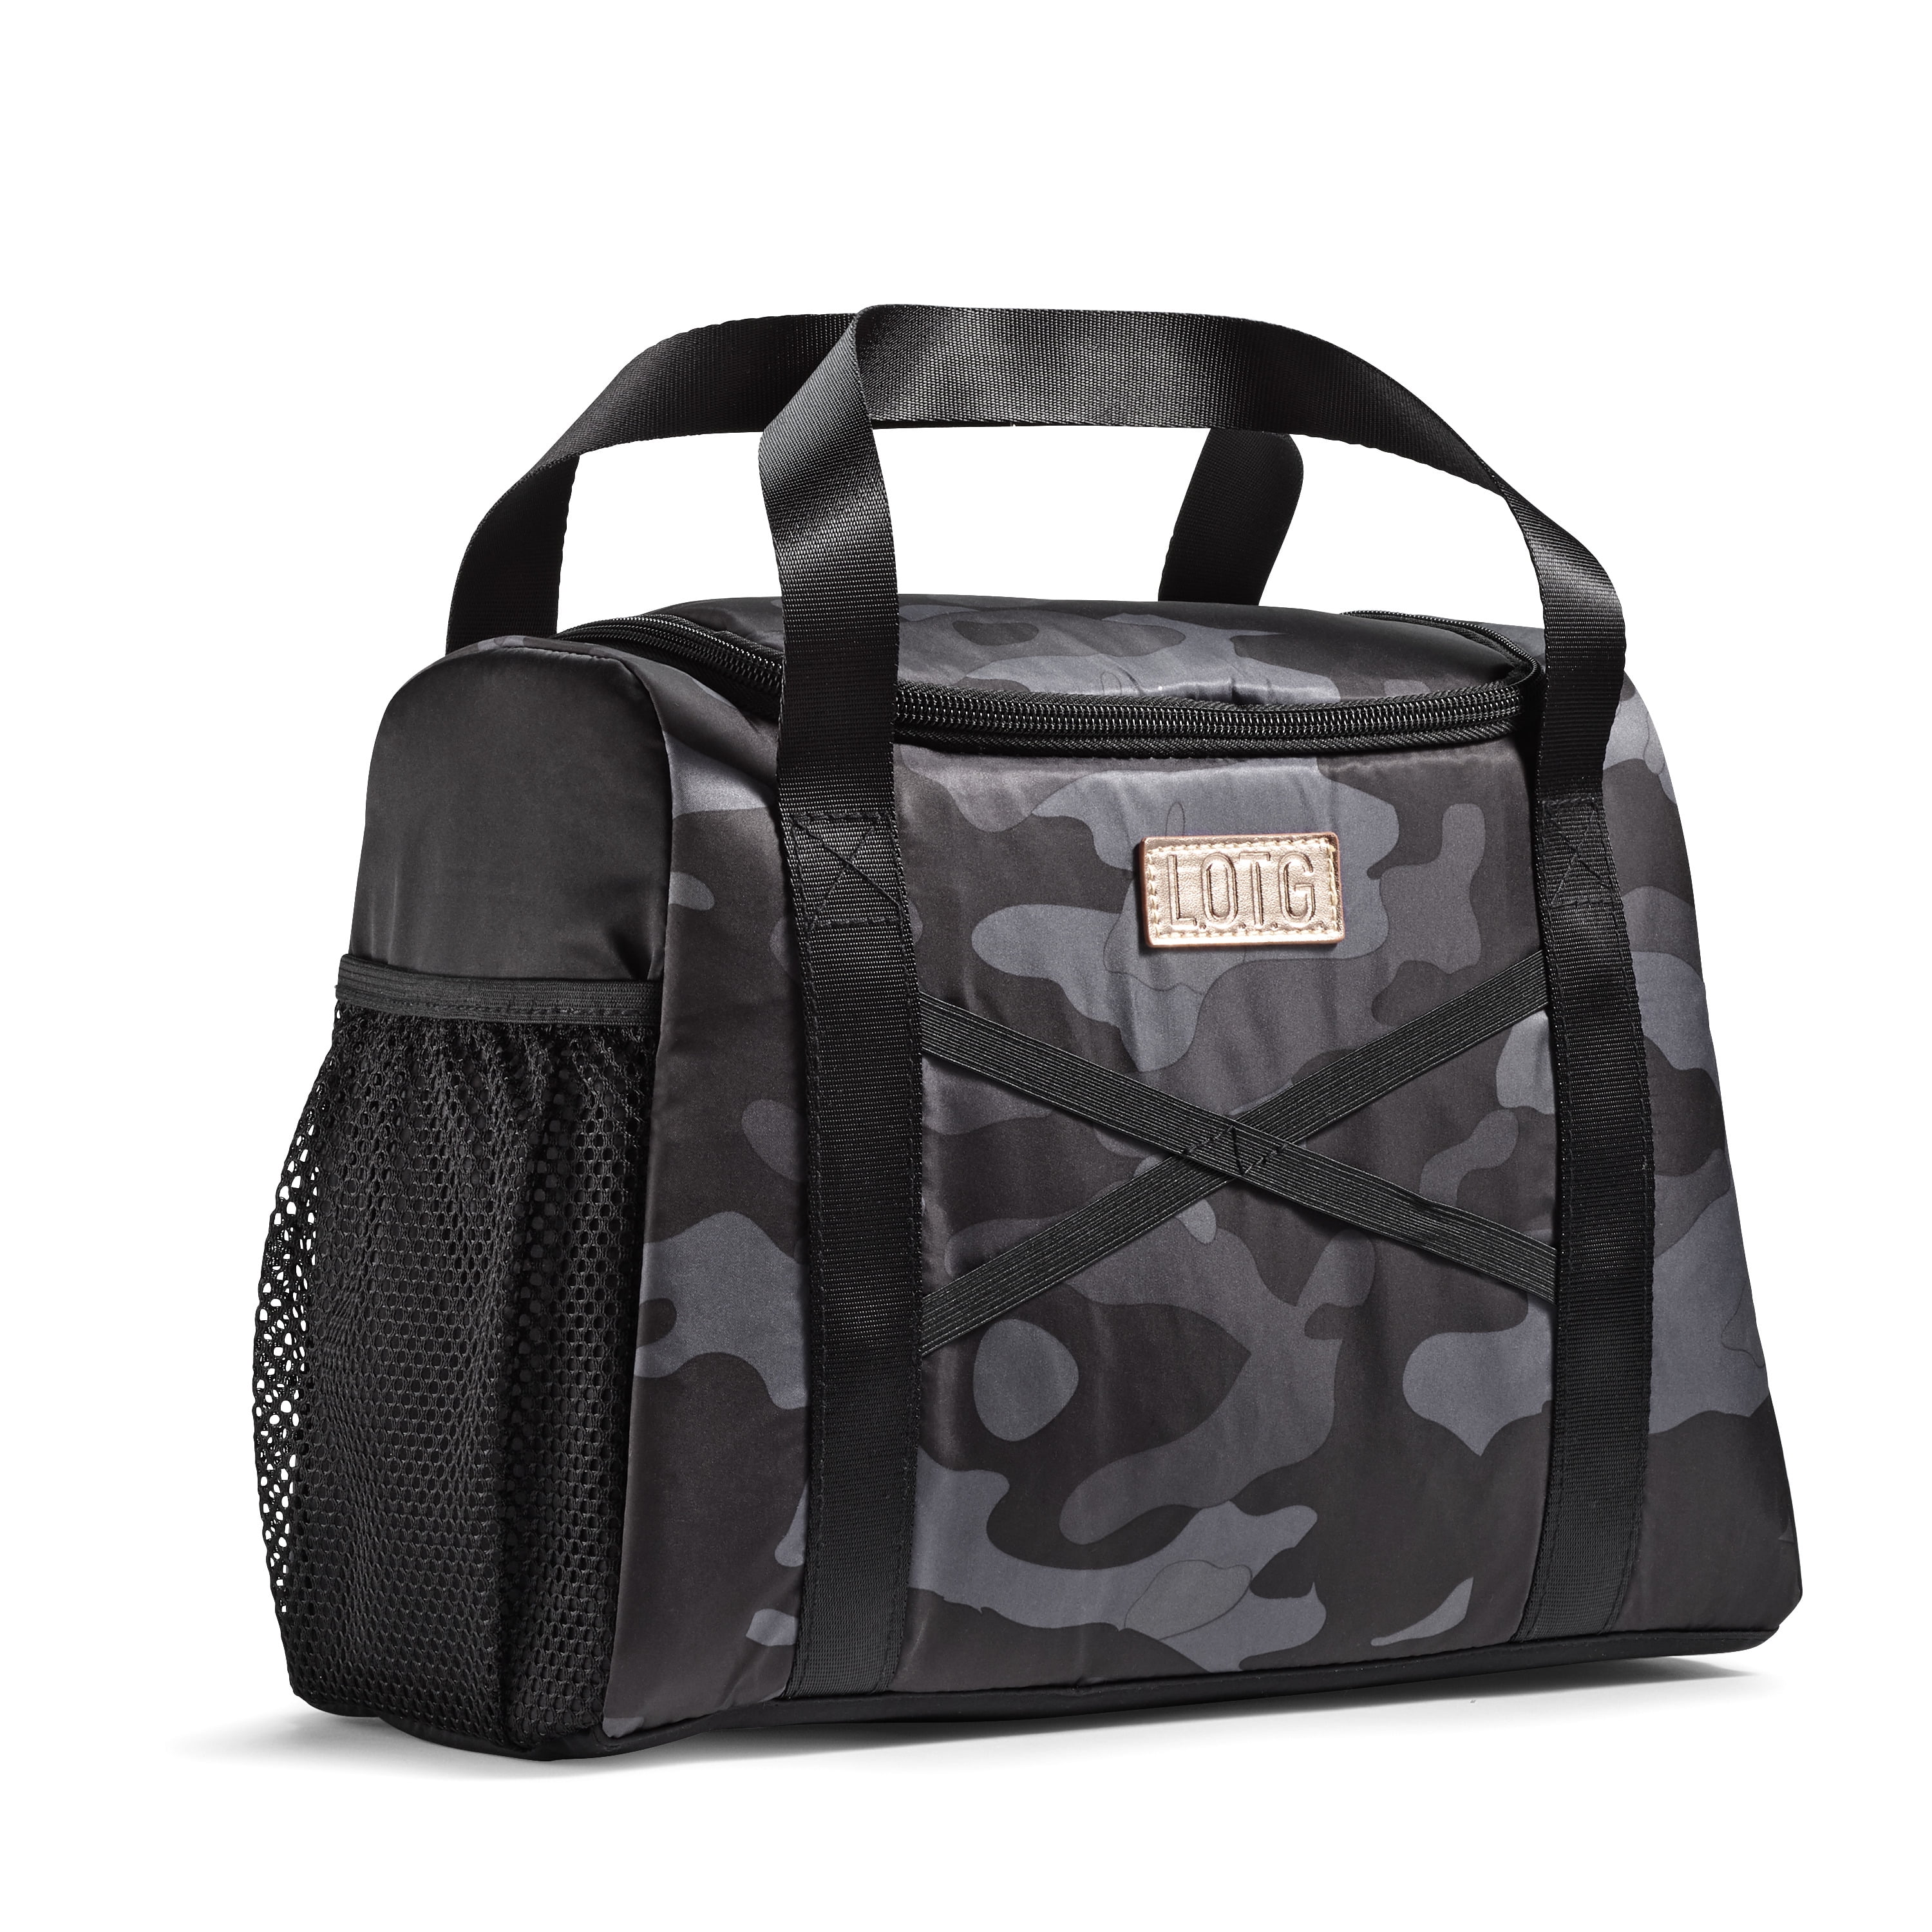 Lunch on the GoLunch Bag for WomenInsulated Lunch Tote for Ladies Girls, 